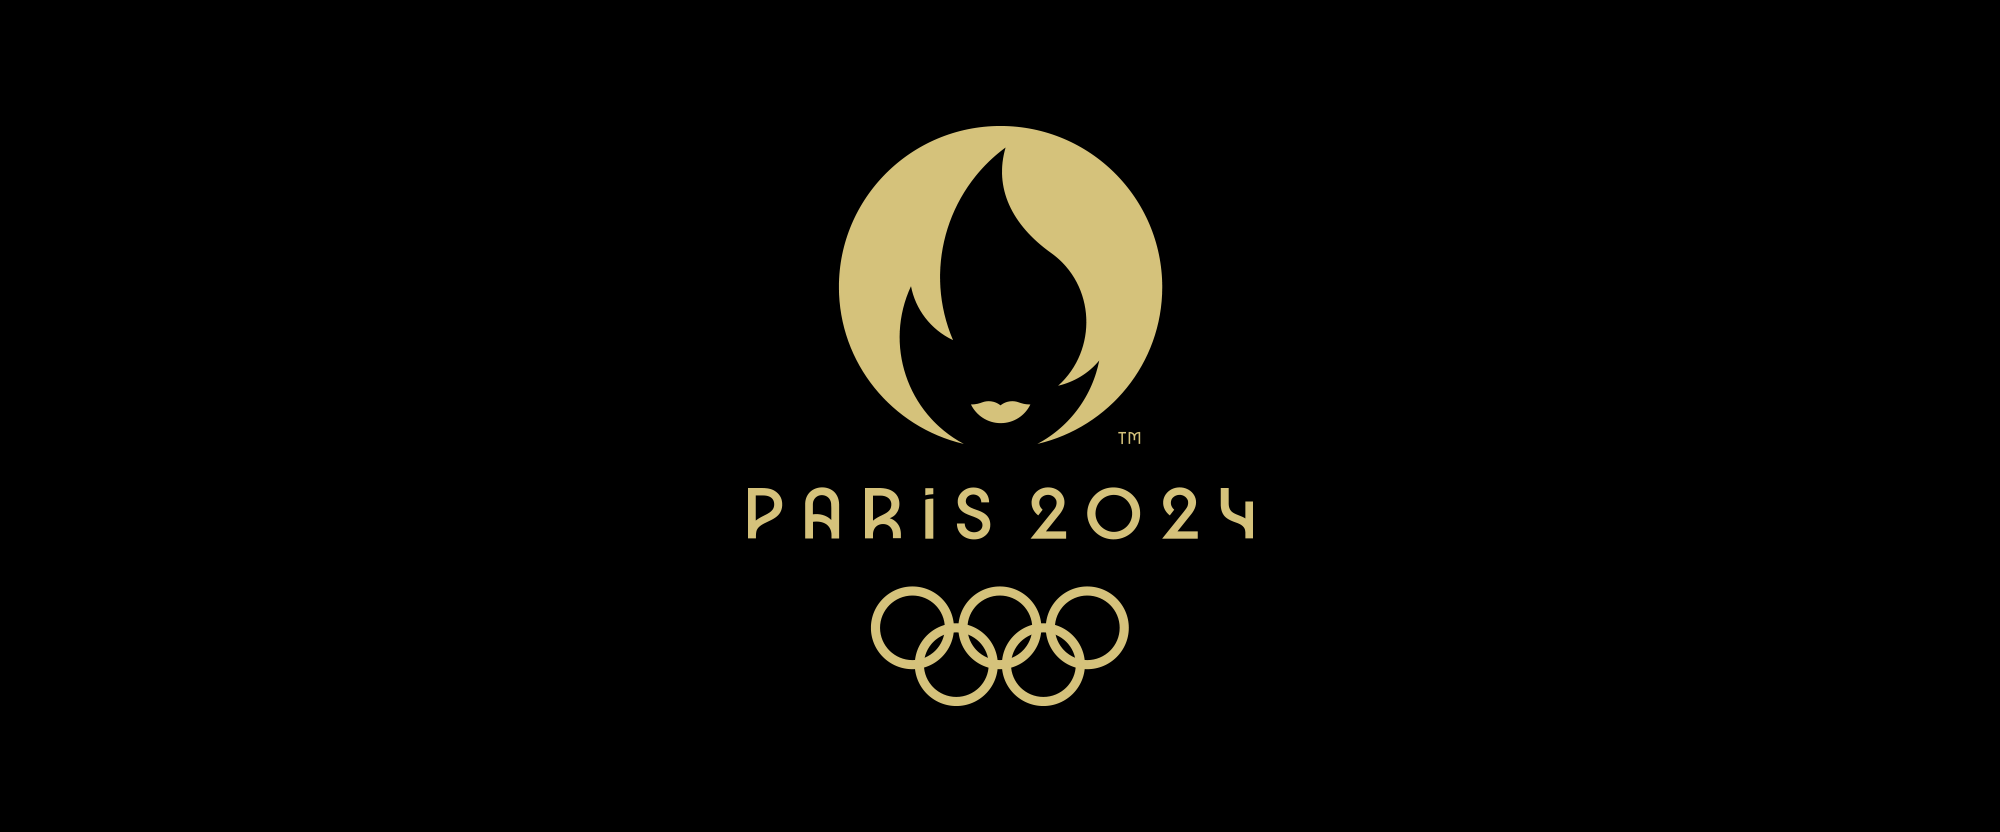 Brand New: New Emblem for 2024 Summer Olympics by Royalties Ecobranding